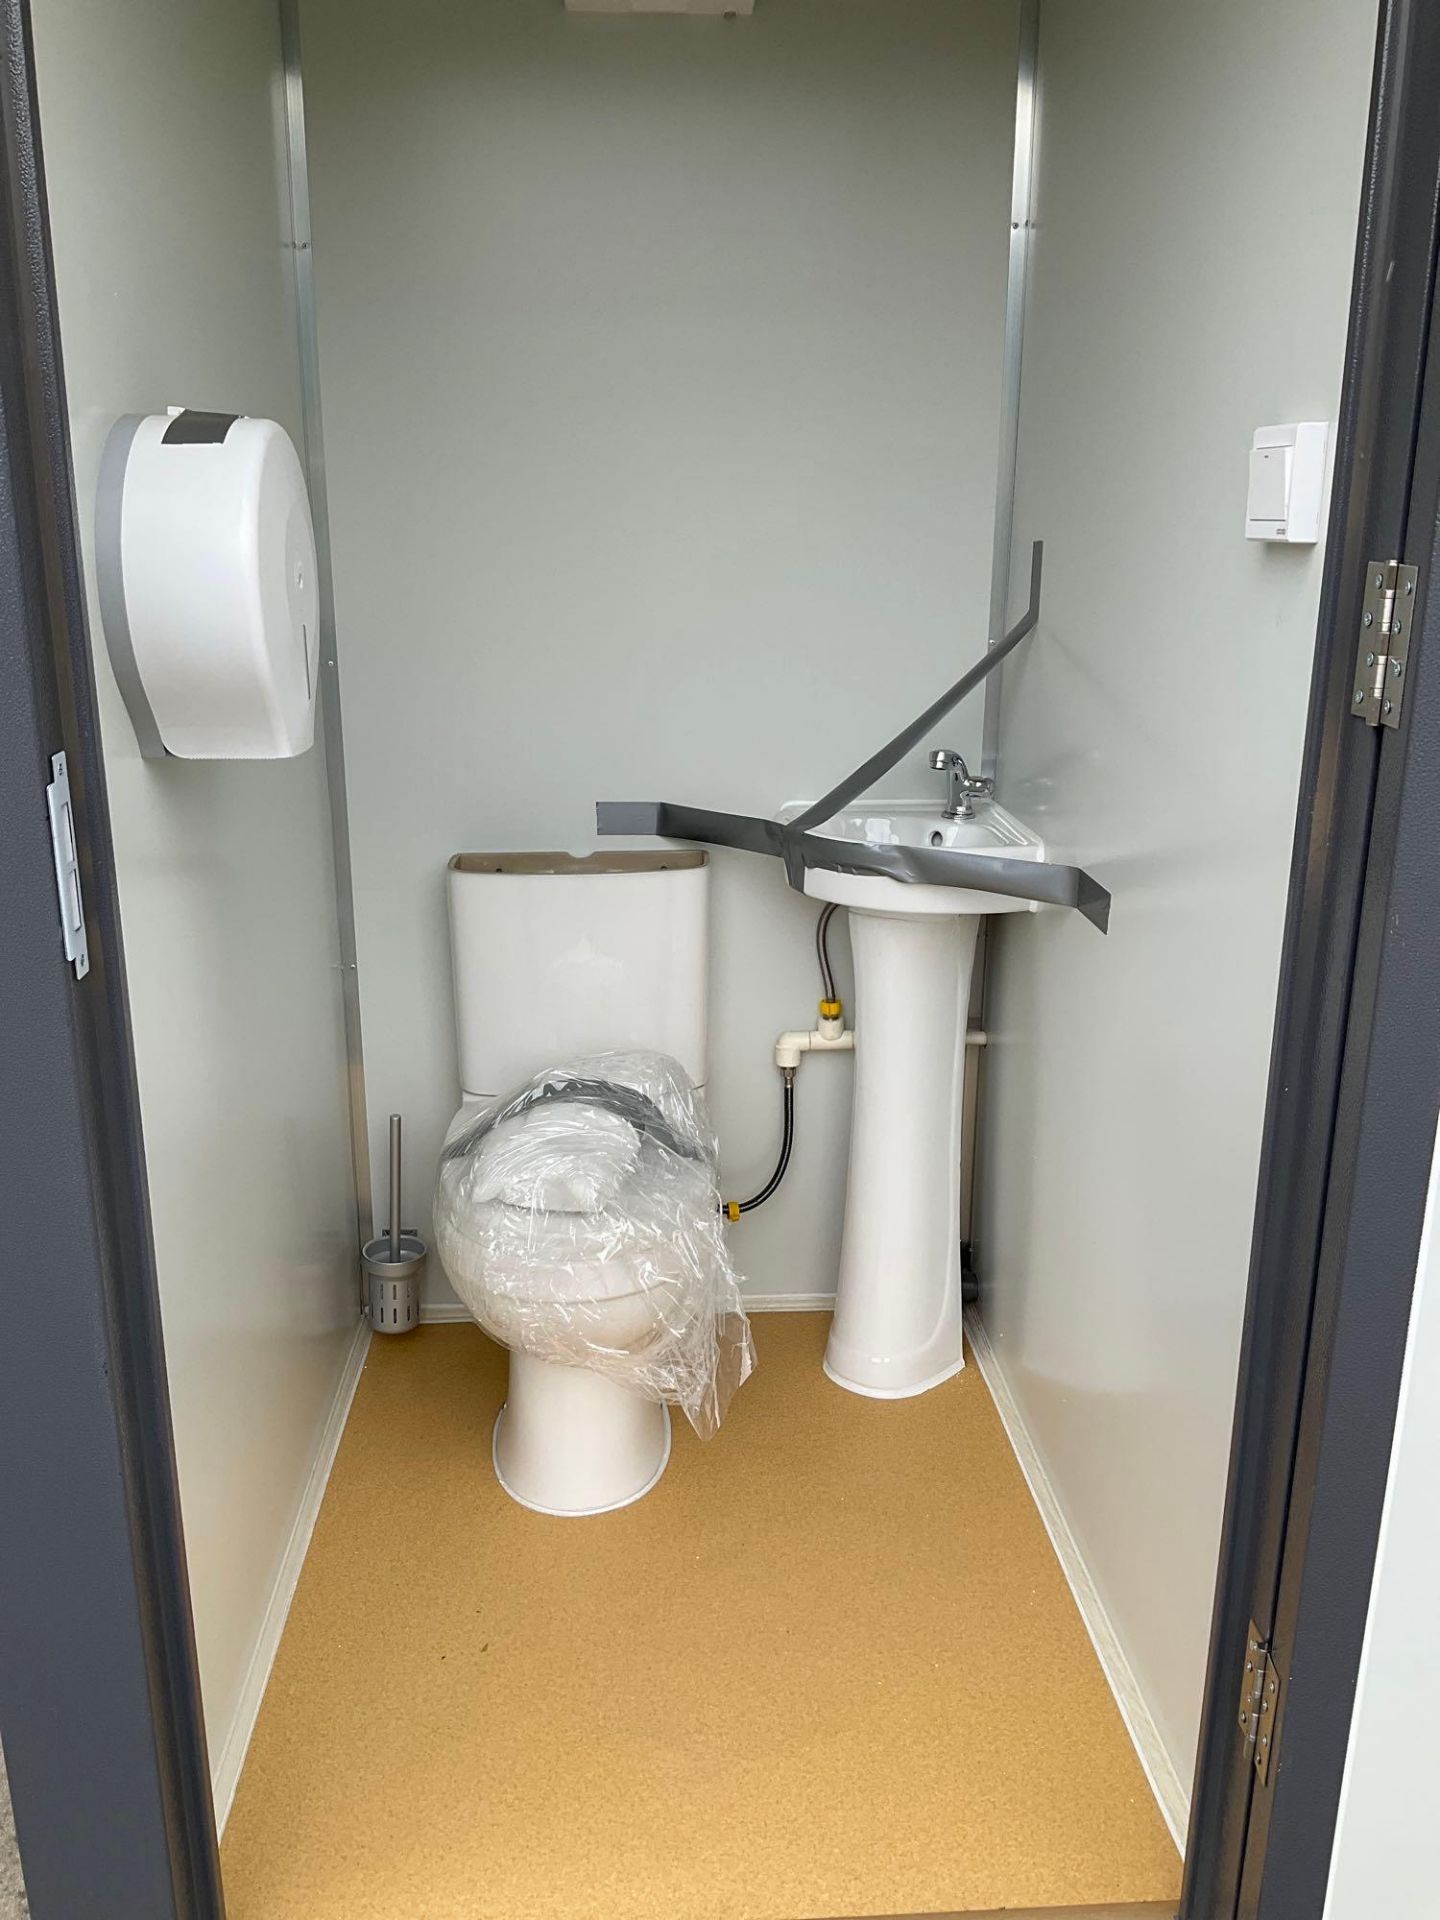 UNUSED PORTABLE DOUBLE BATHROOM UNIT, 2 STALLS, ELECTRIC & PLUMBING HOOK UP WITH EXTERIOR PLUMBING C - Image 15 of 16